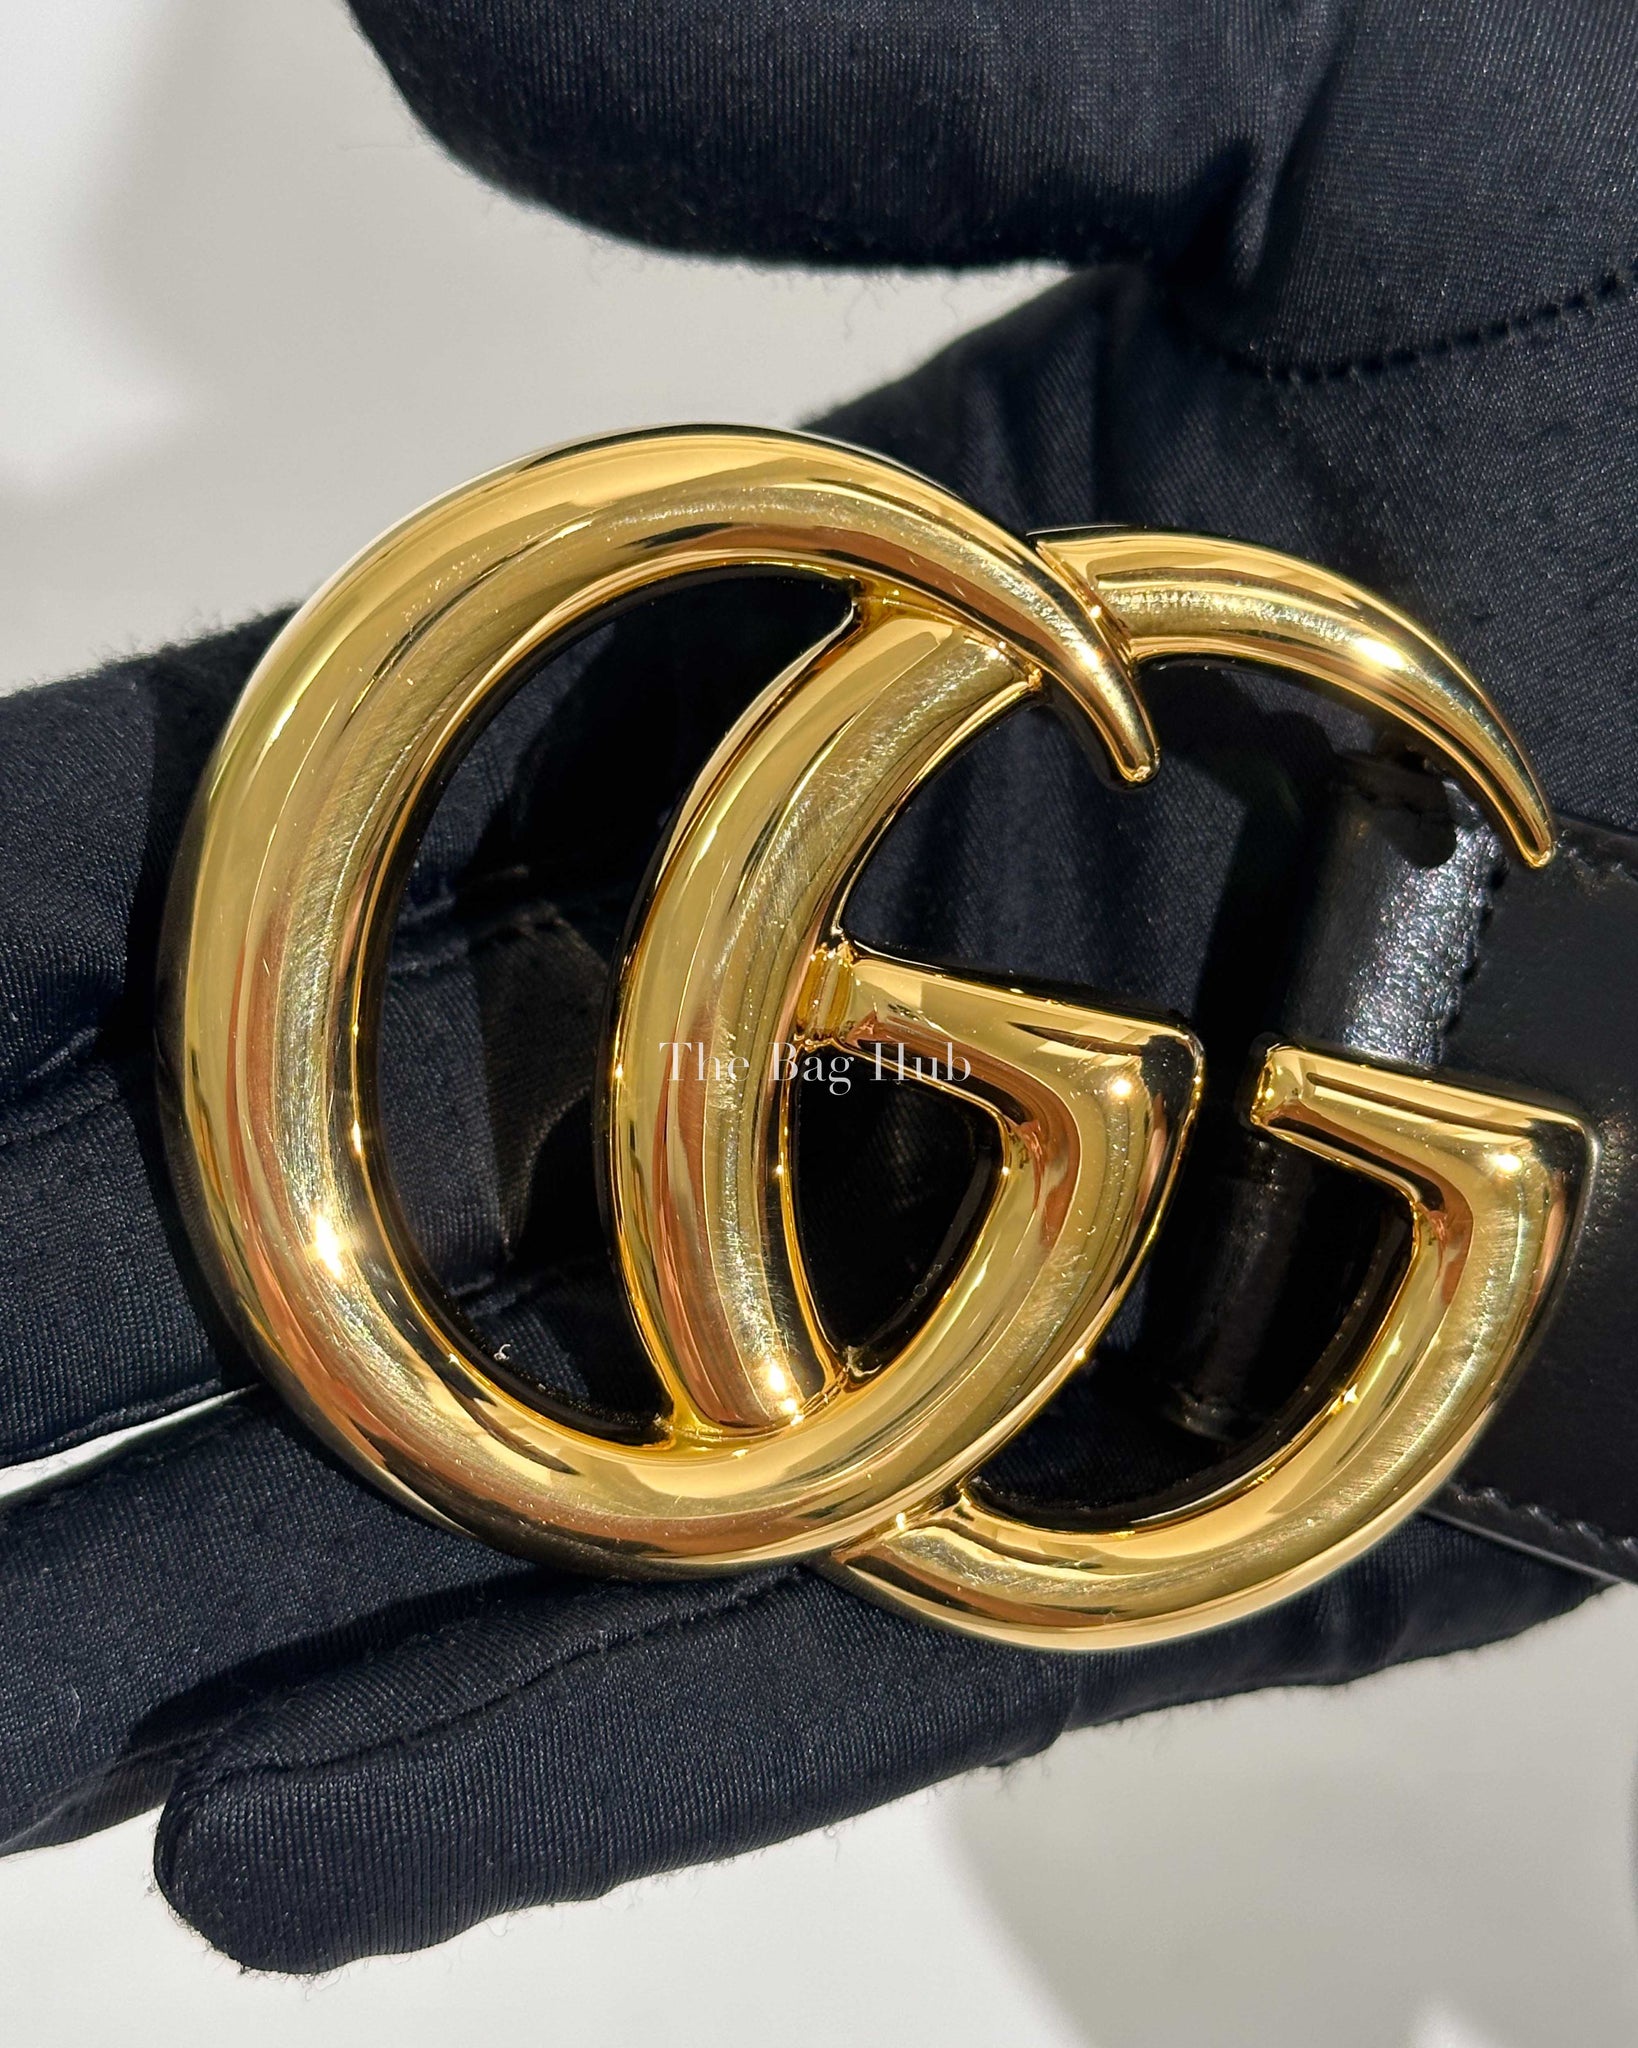 Gucci Black Leather GG Marmont Shiny Buckle Belt 95/38-8